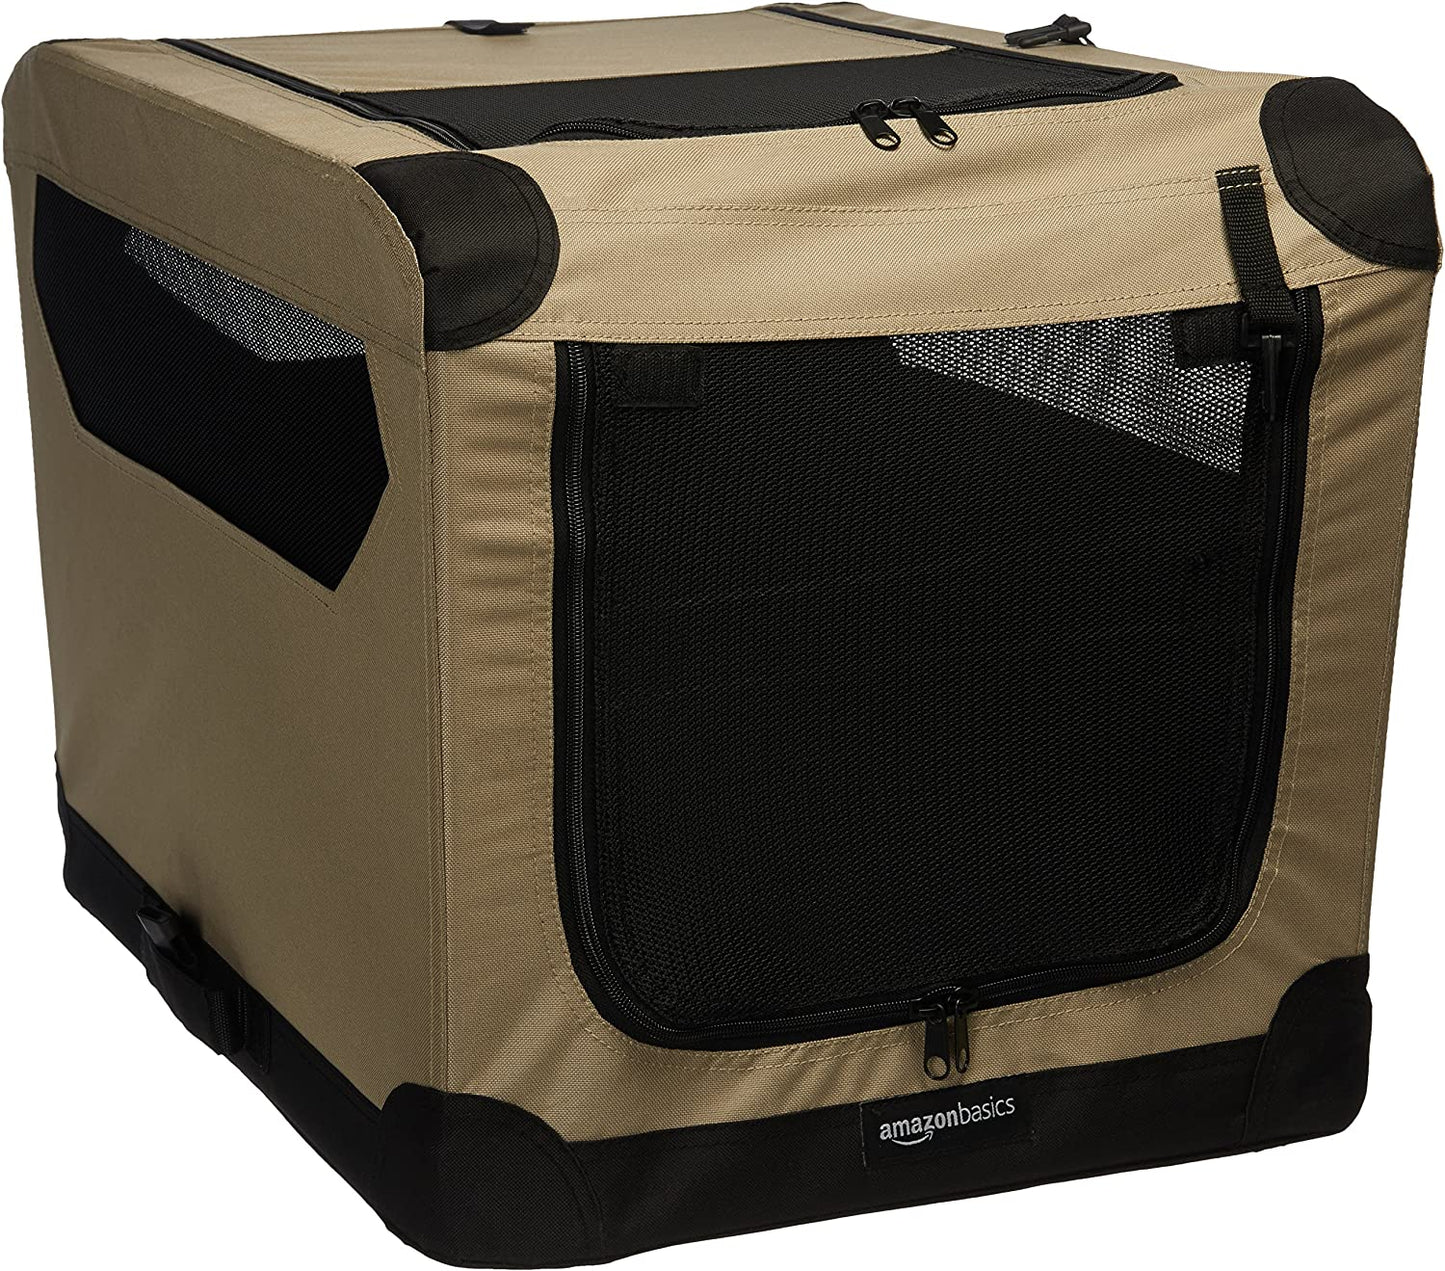 Amazon Basics 3-Door Collapsible Soft-Sided Folding Soft Dog Travel Crate Kennel